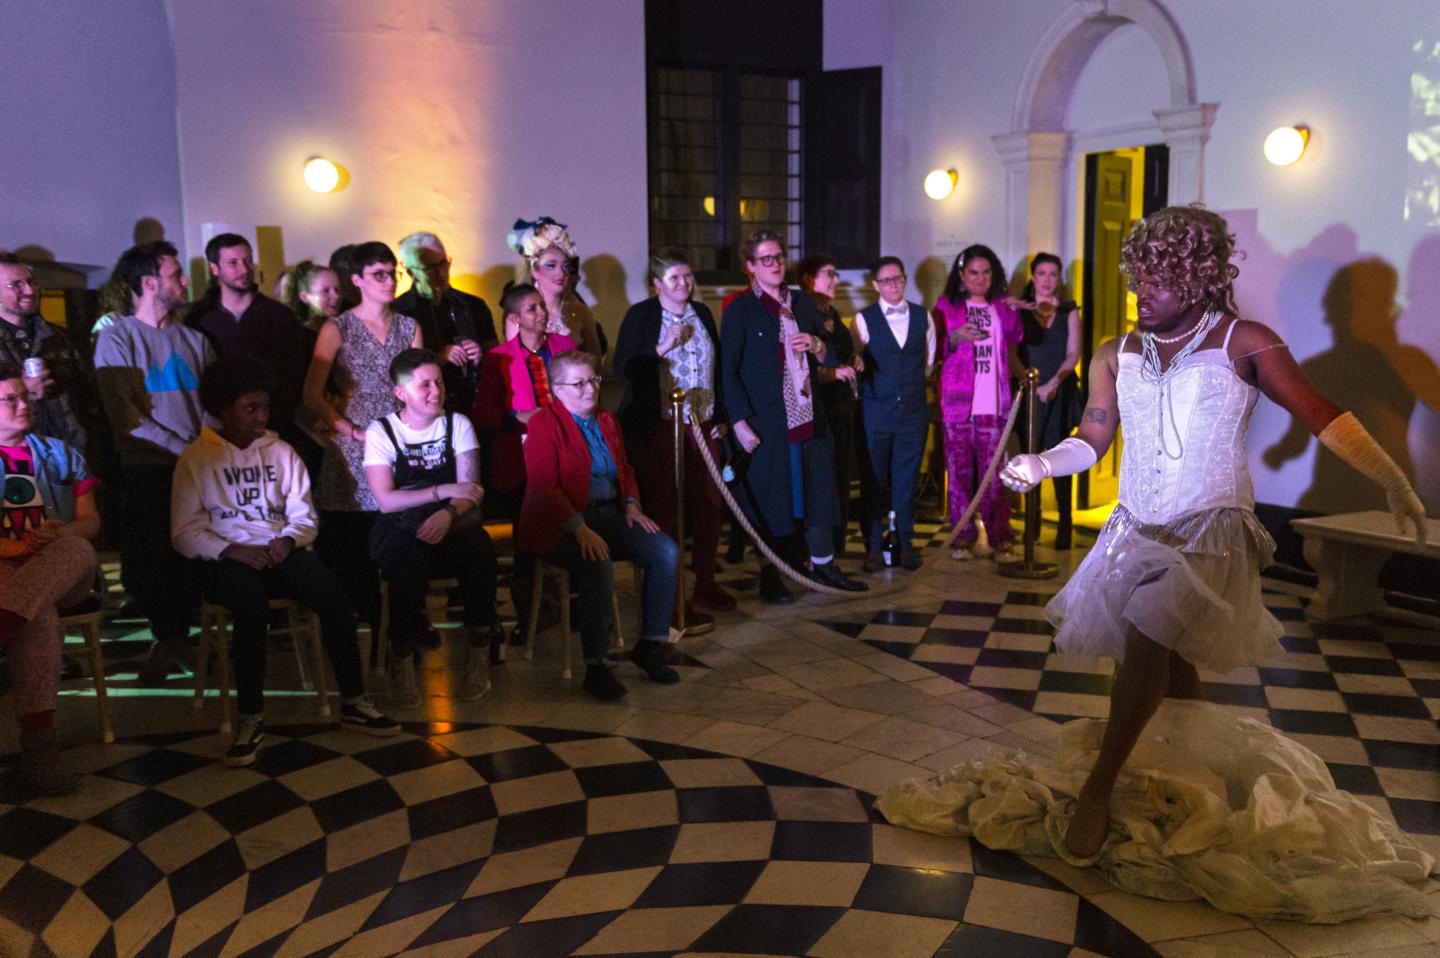 A photo of Lasana Shabazz in their Queen Charlotte outfit striding through the Great Hall in the Queen's House with an audience in the background. Taken at the Fierce Queens event in 2020.